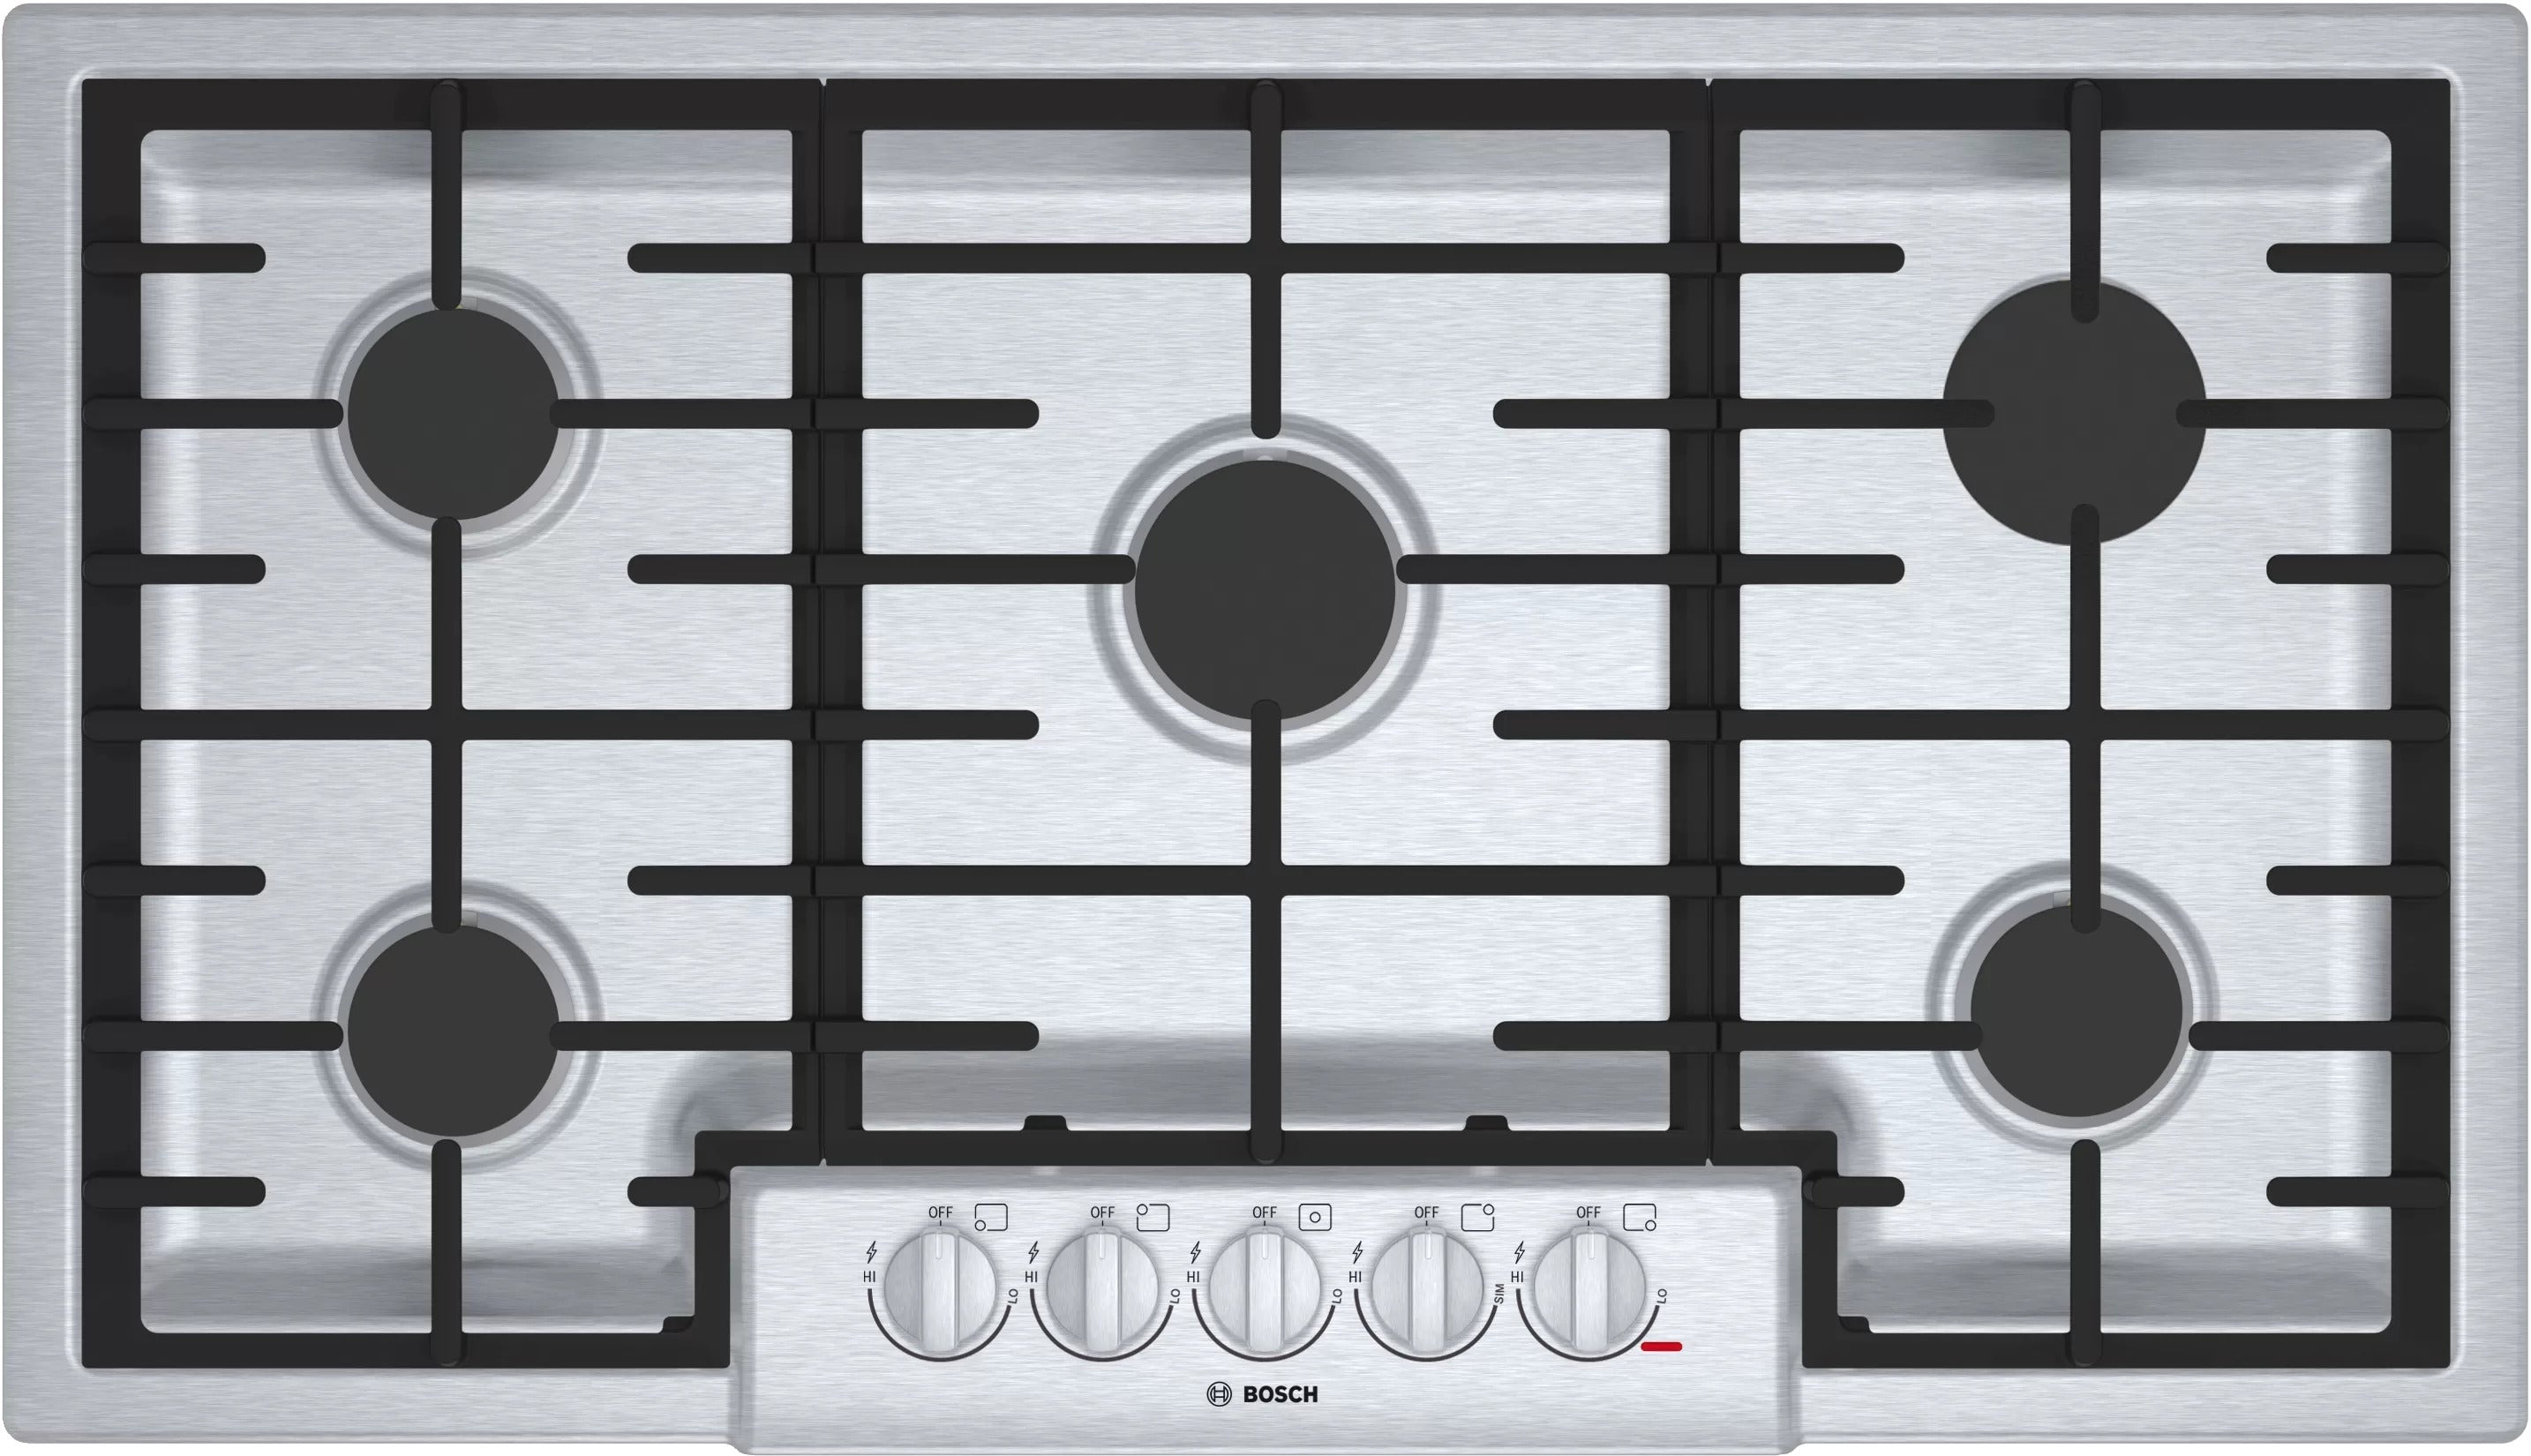 Bosch - 36 inch wide Gas Cooktop in Stainless Steel - NGM8656UC